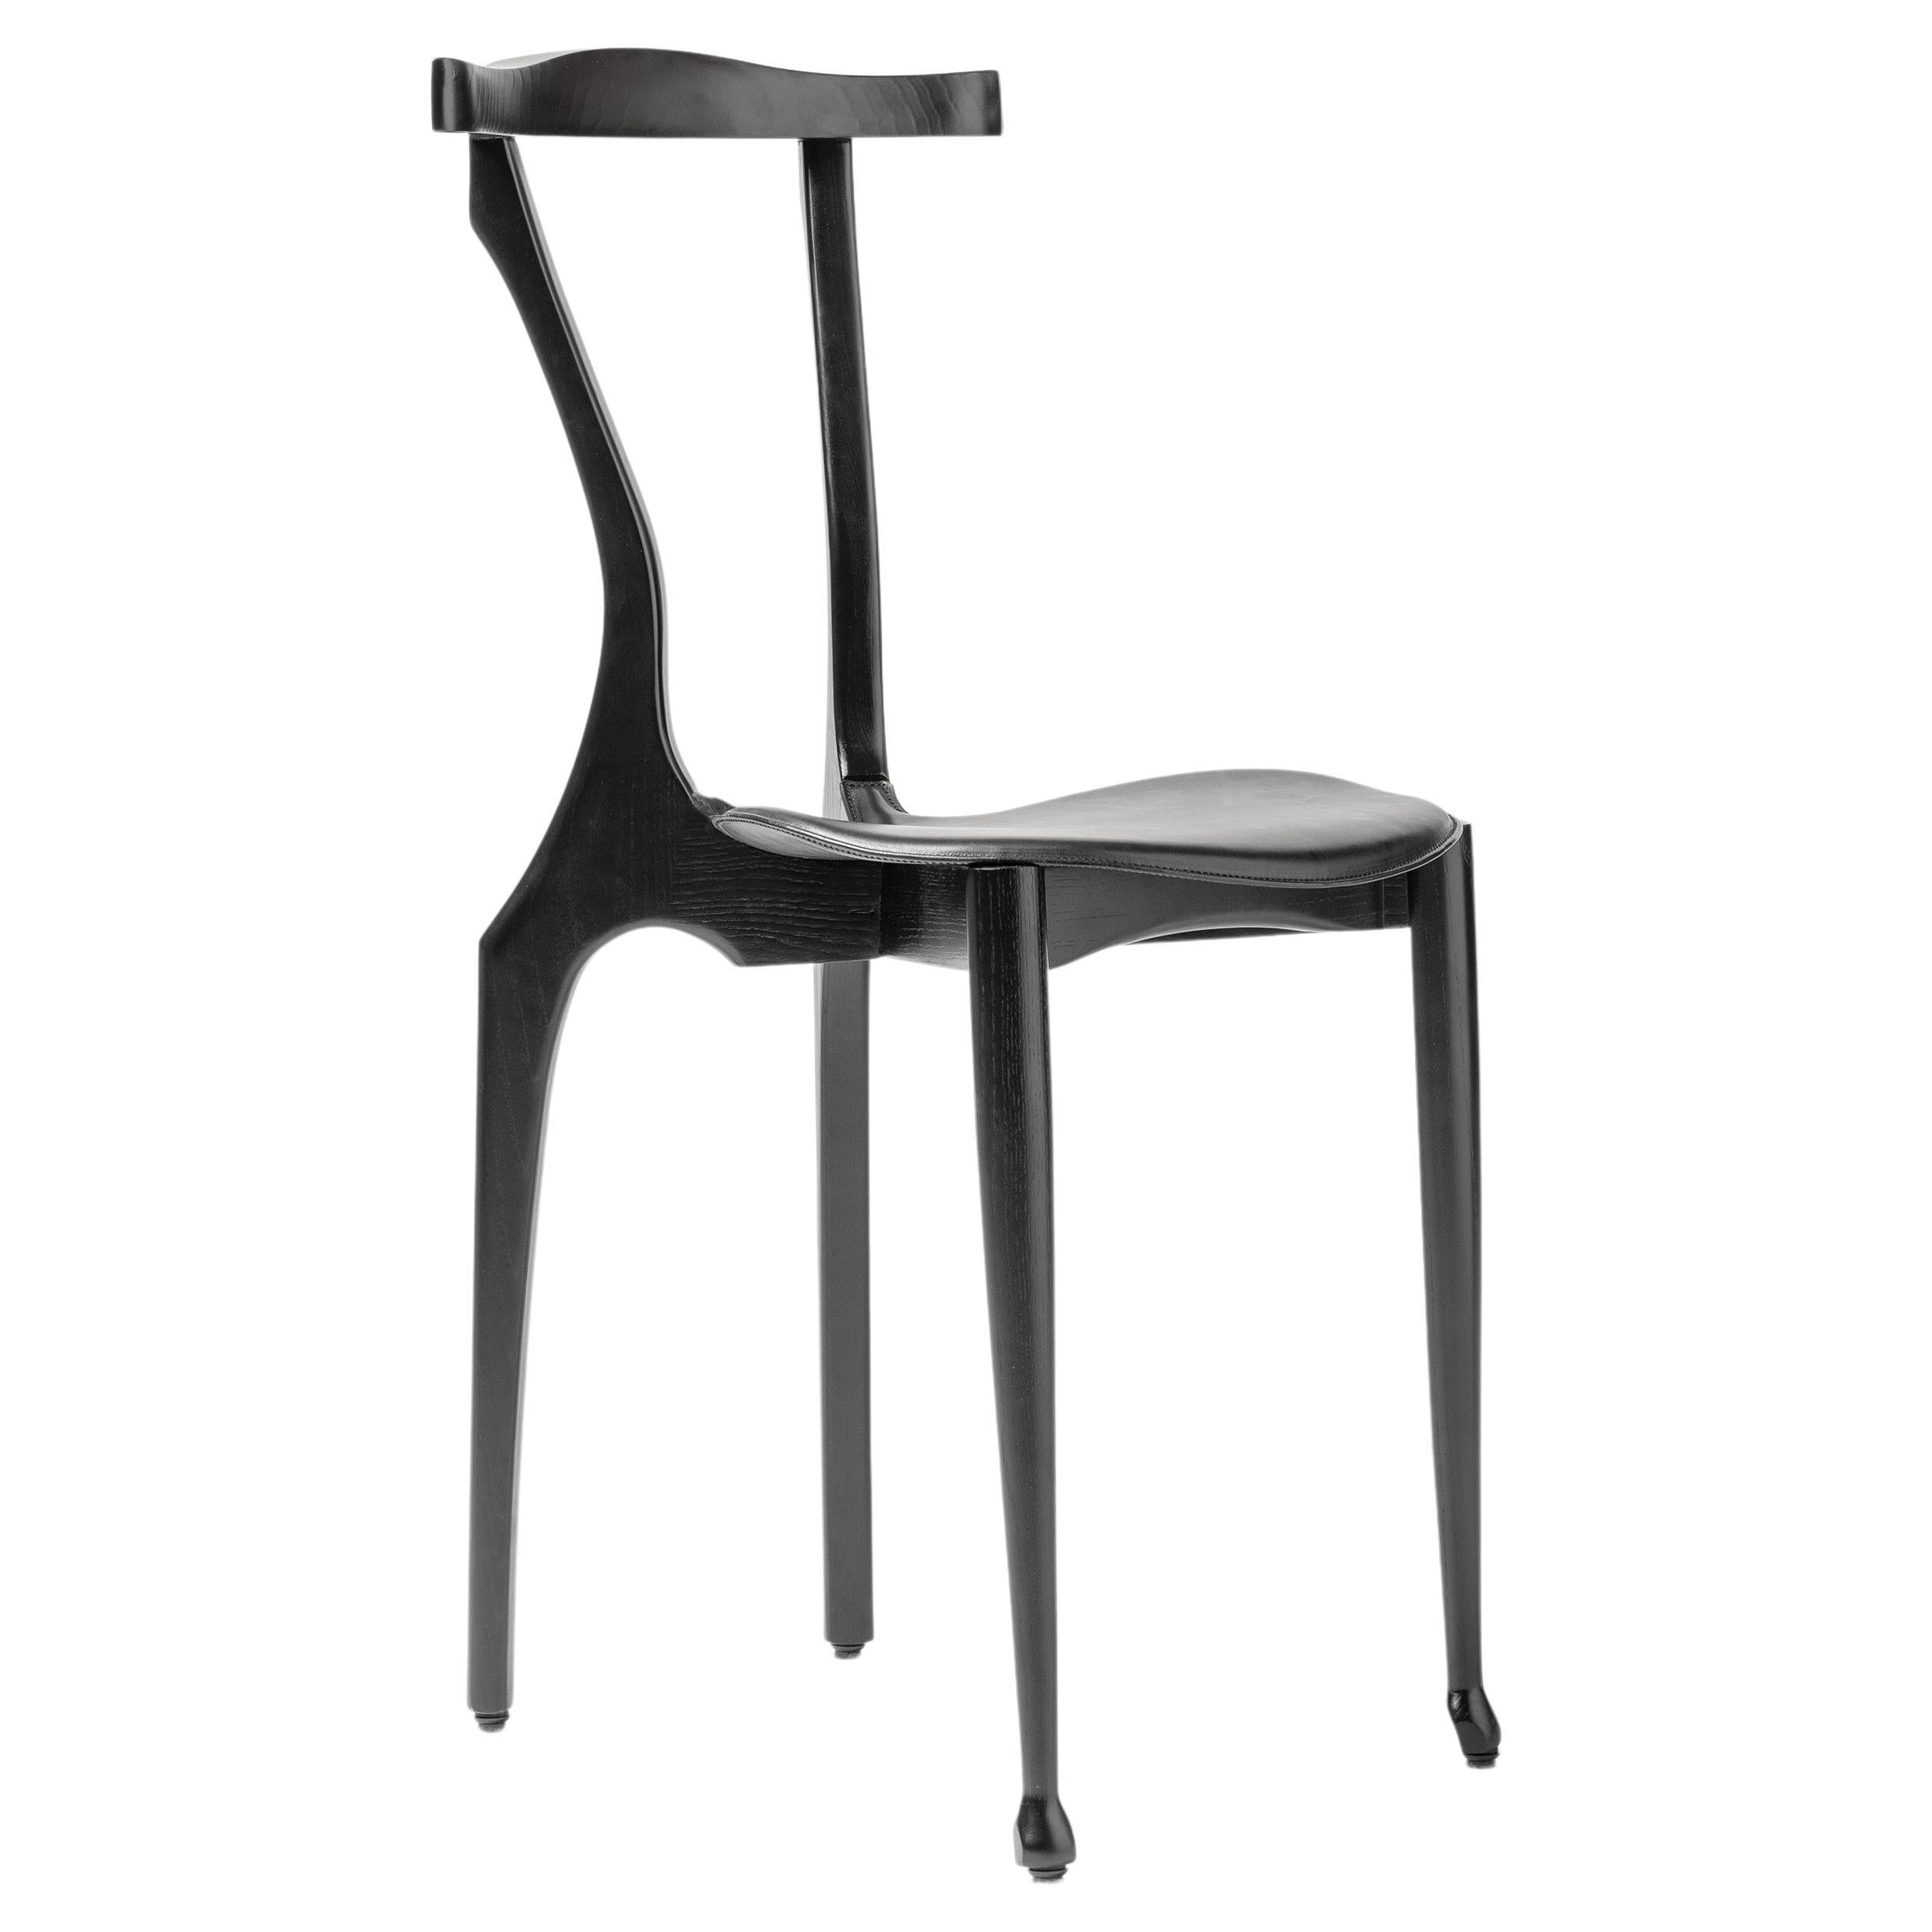 "Gaulinetta" Dining Chair Lacquered Black Ash Wood, Contemporary Spanish Design